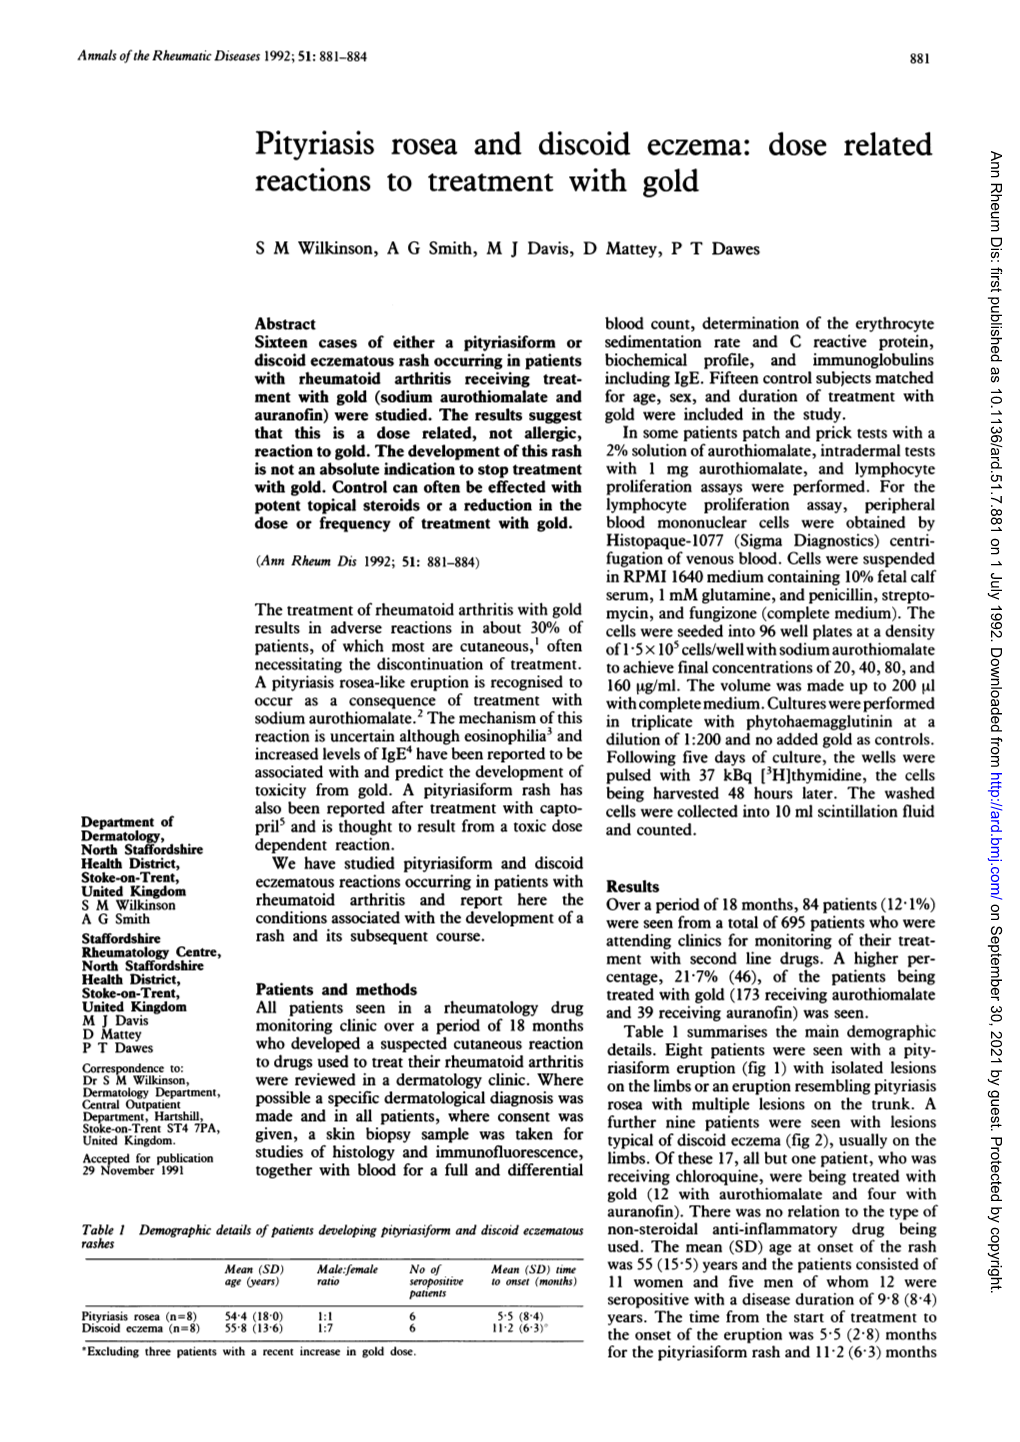 Pityriasis Rosea and Discoid Eczema: Dose Related Ann Rheum Dis: First Published As 10.1136/Ard.51.7.881 on 1 July 1992